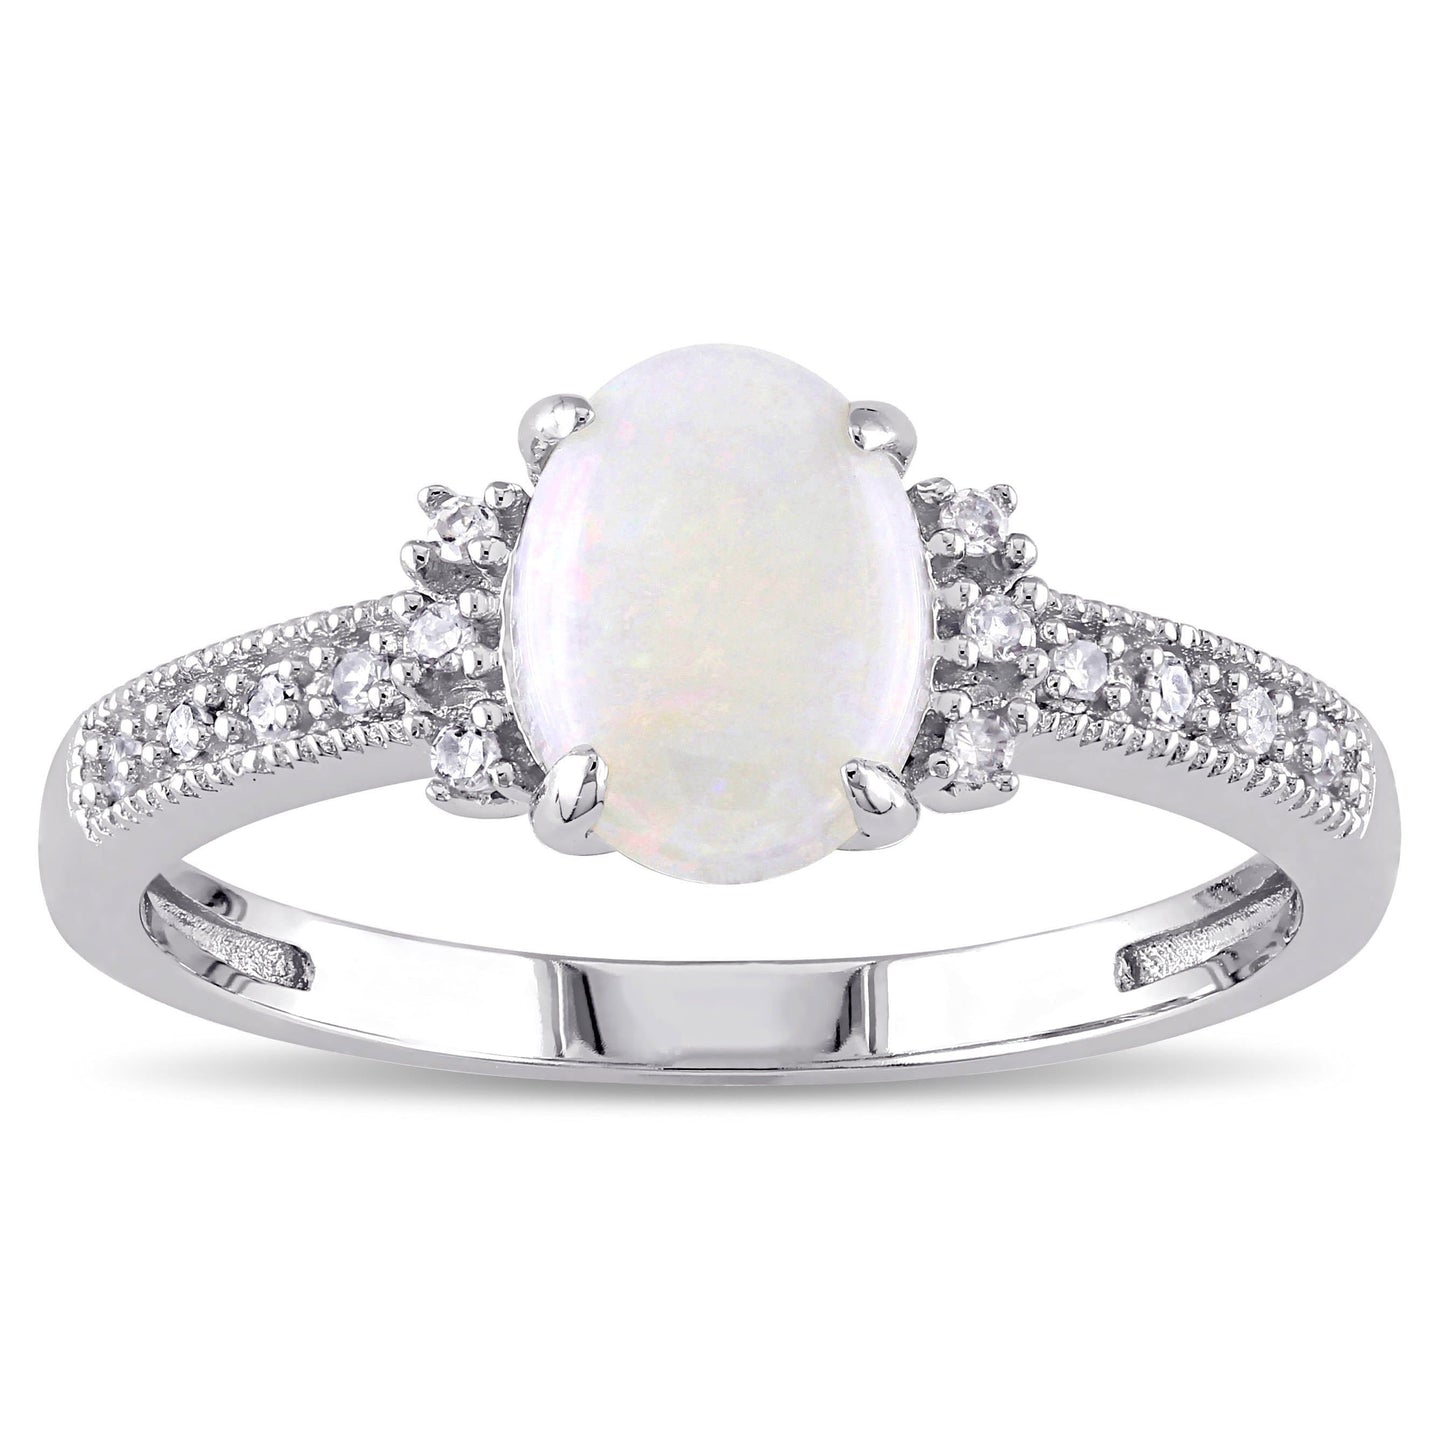 Sophia B 3/4ct White Opal Ring with Diamond Accents